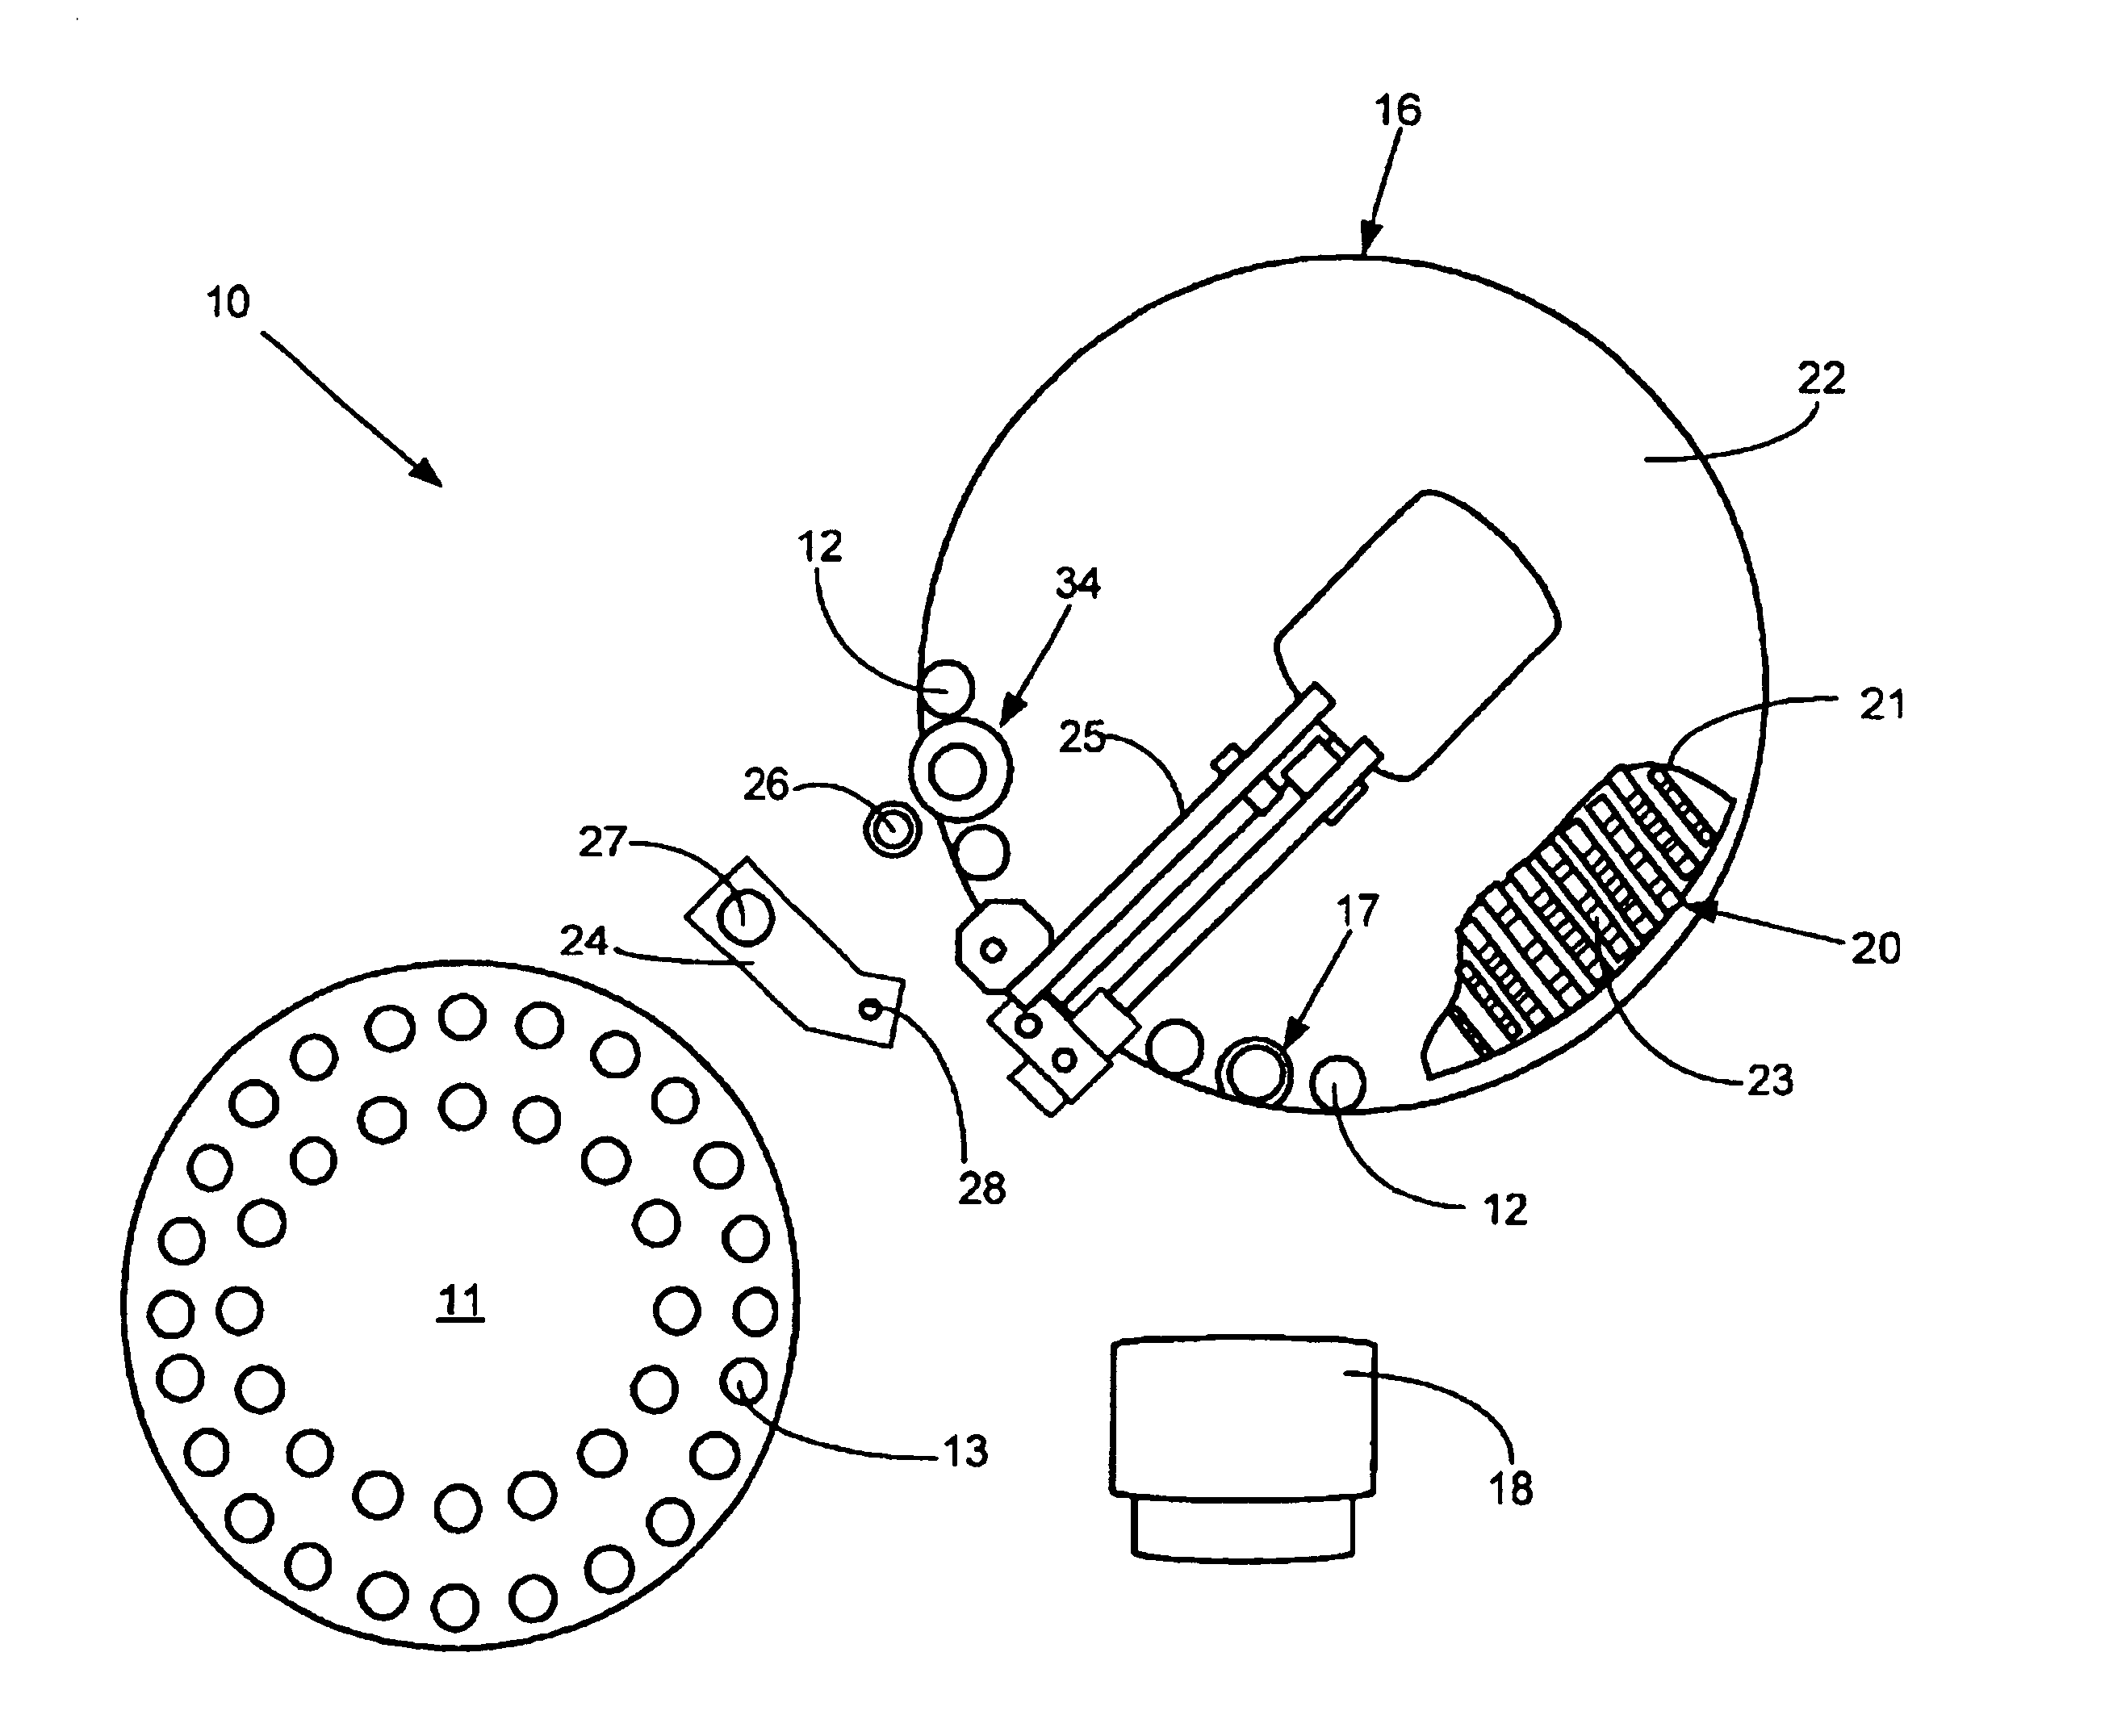 Liquid sample dispensing methods for precisely delivering liquids without crossover